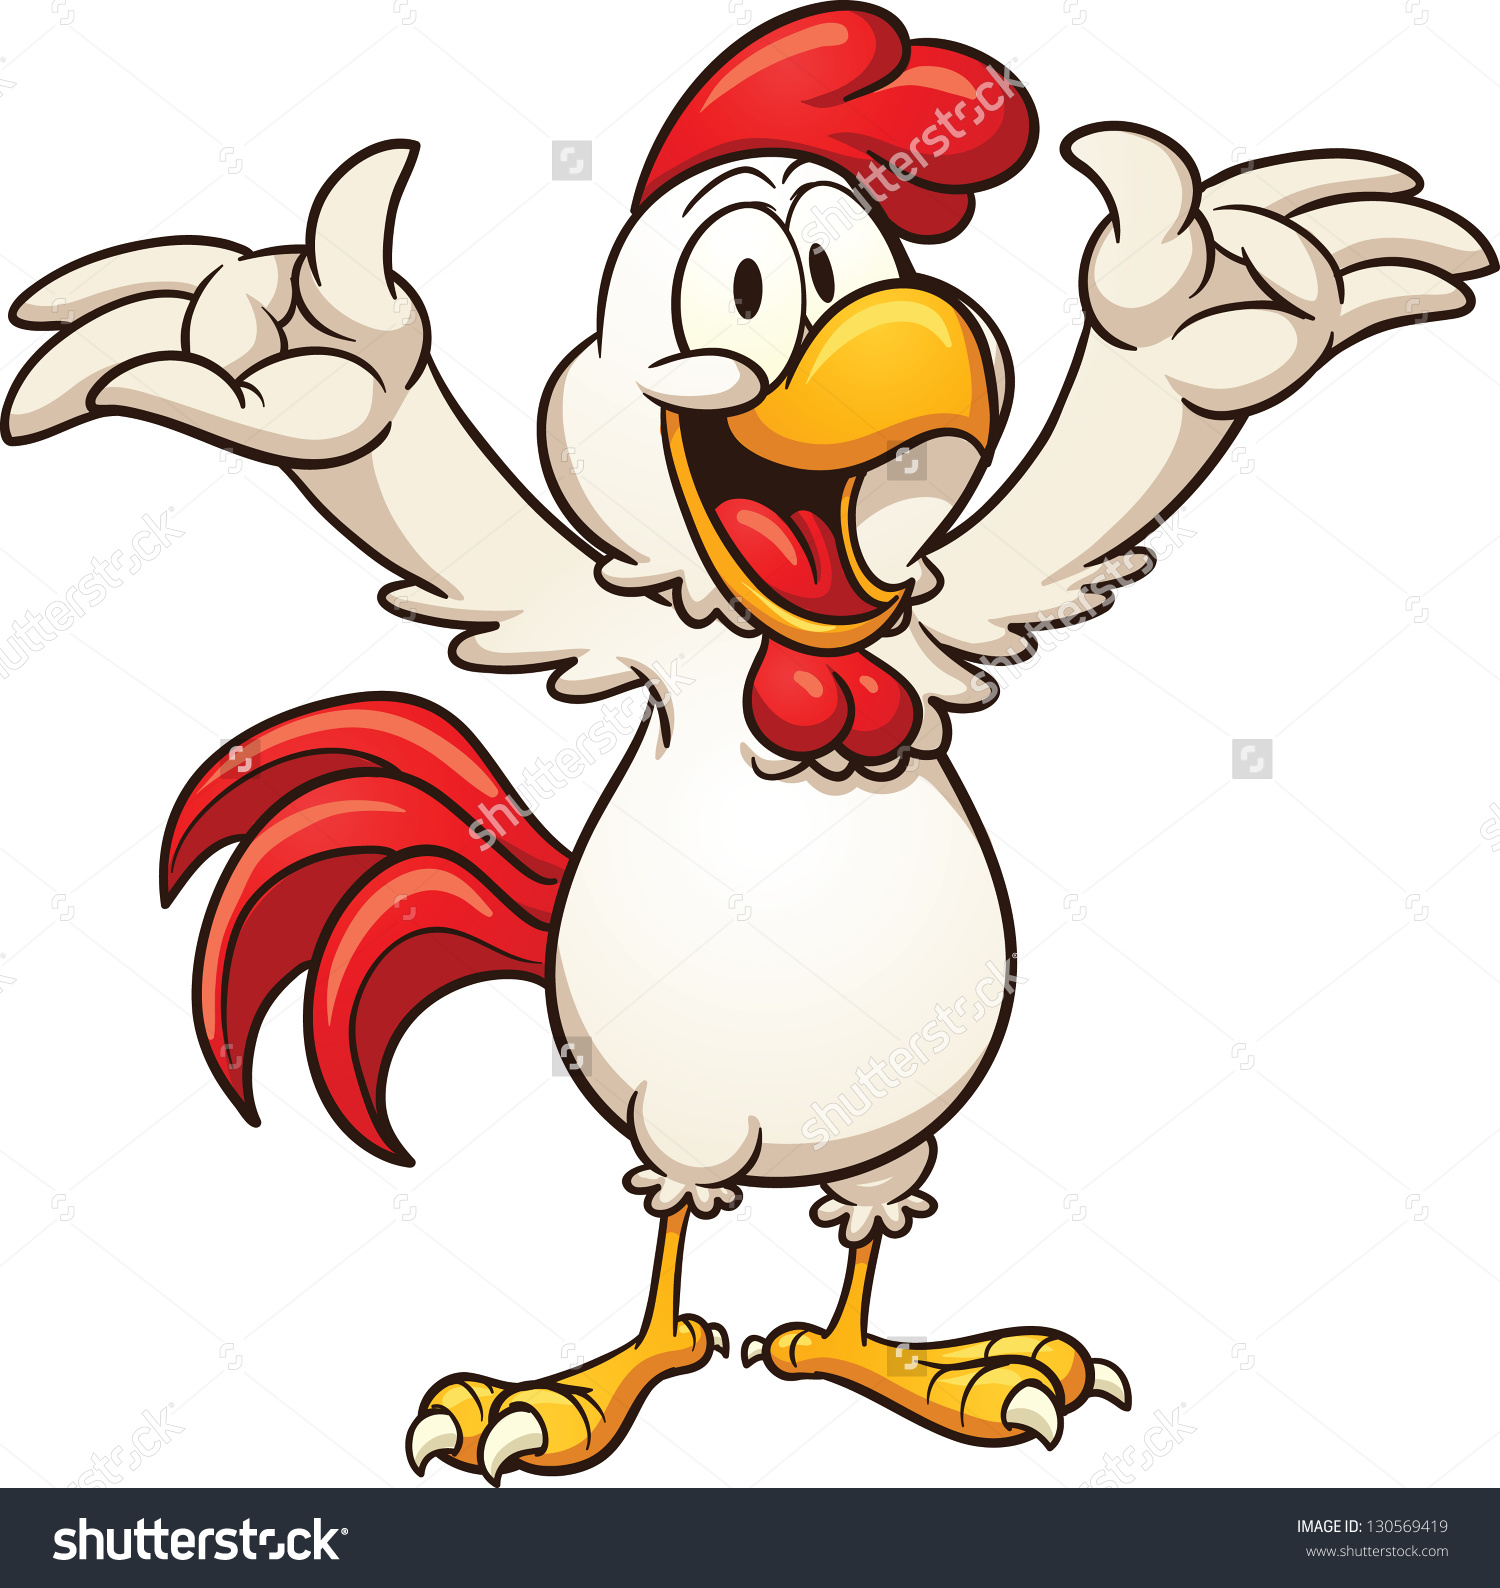 Animated chicken clipart.